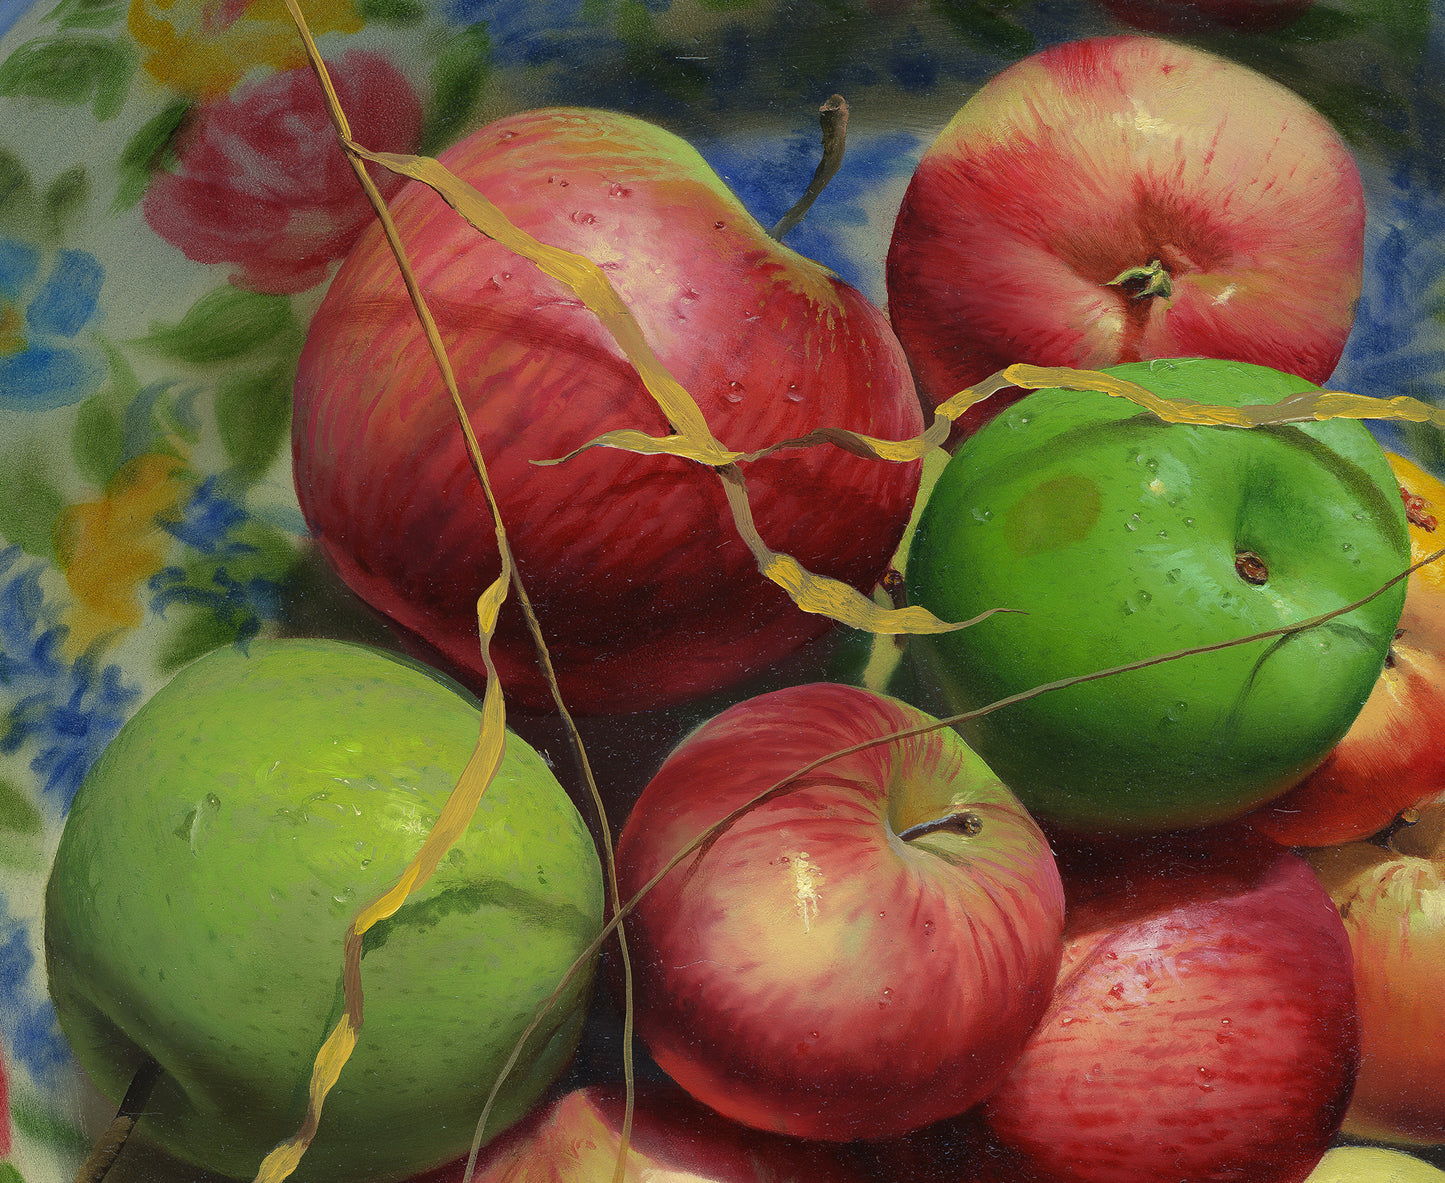 "Apple Harvest" 24x24 inches, Signed and Numbered Limited Edition